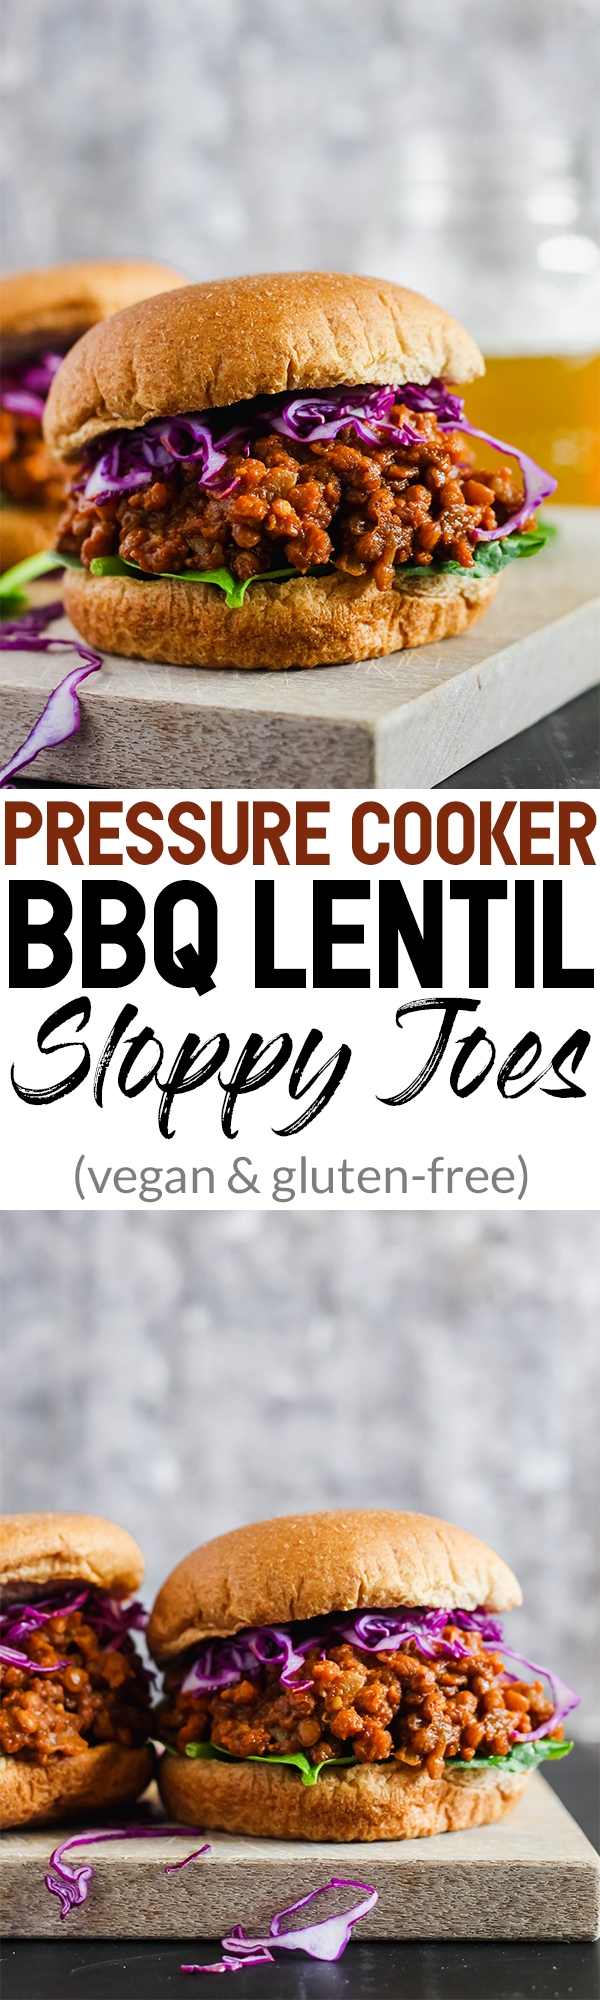 Look no further for a hearty, nourishing summer dinner recipe: these BBQ Lentil Sloppy Joes fit the bill! The lentils are made in the pressure cooker for ultimate convenience. (vegan & gluten-free)